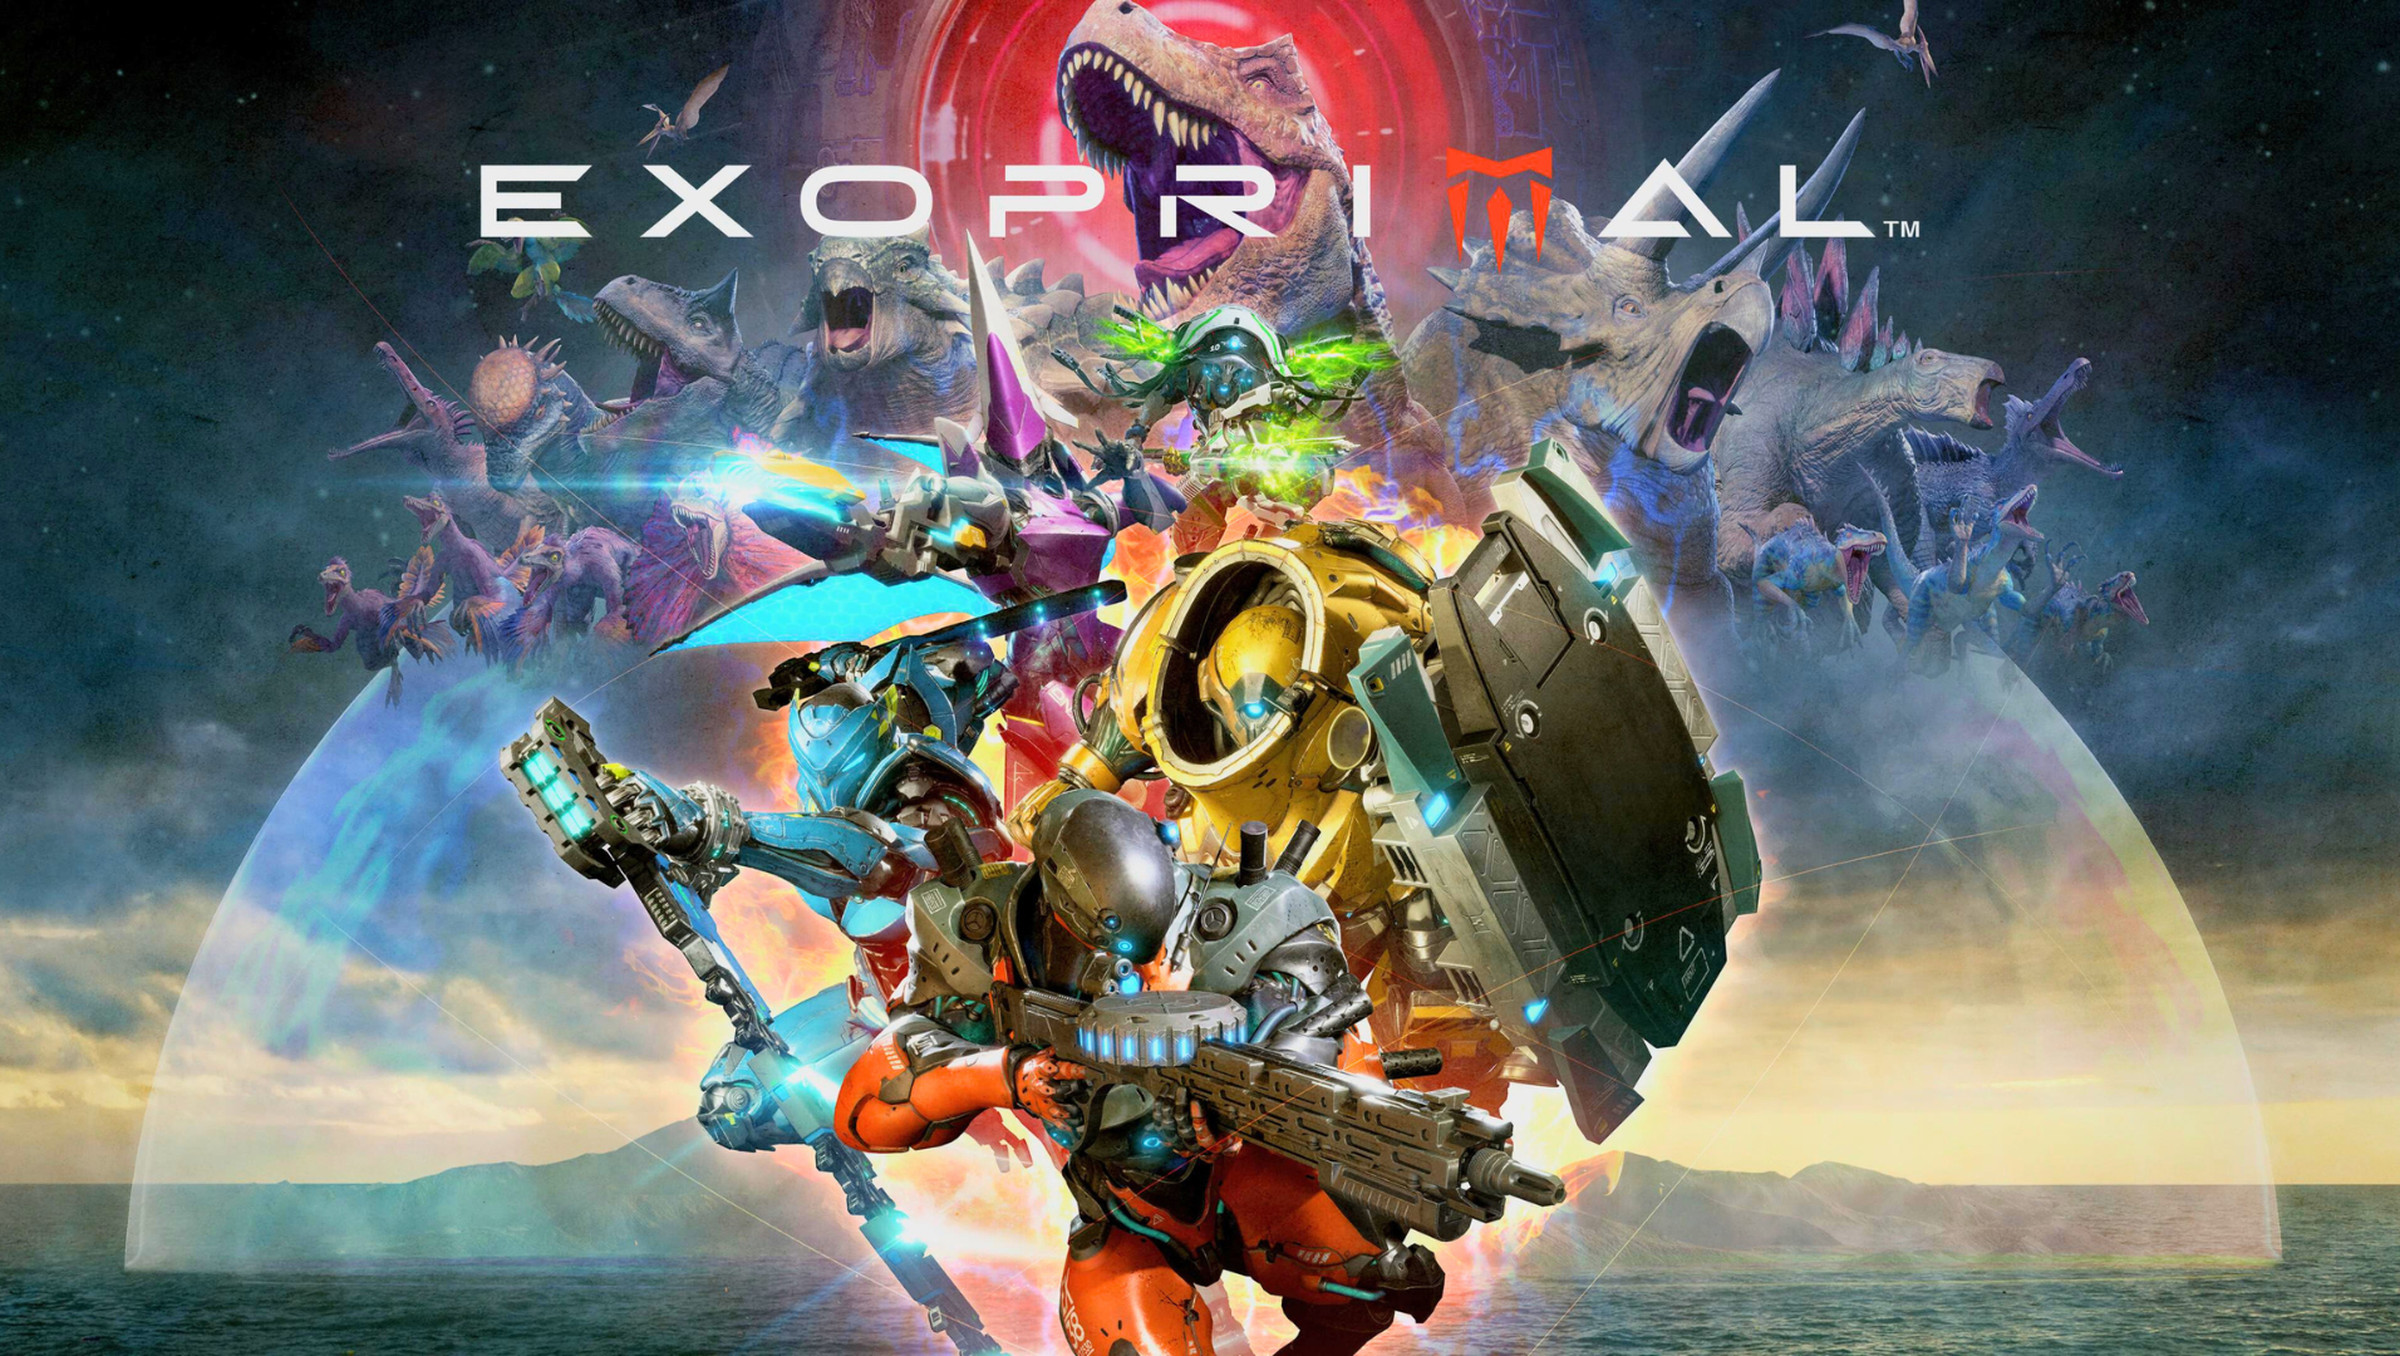 Key art from Exoprimal featuring a collection of dinosaurs and exosuits